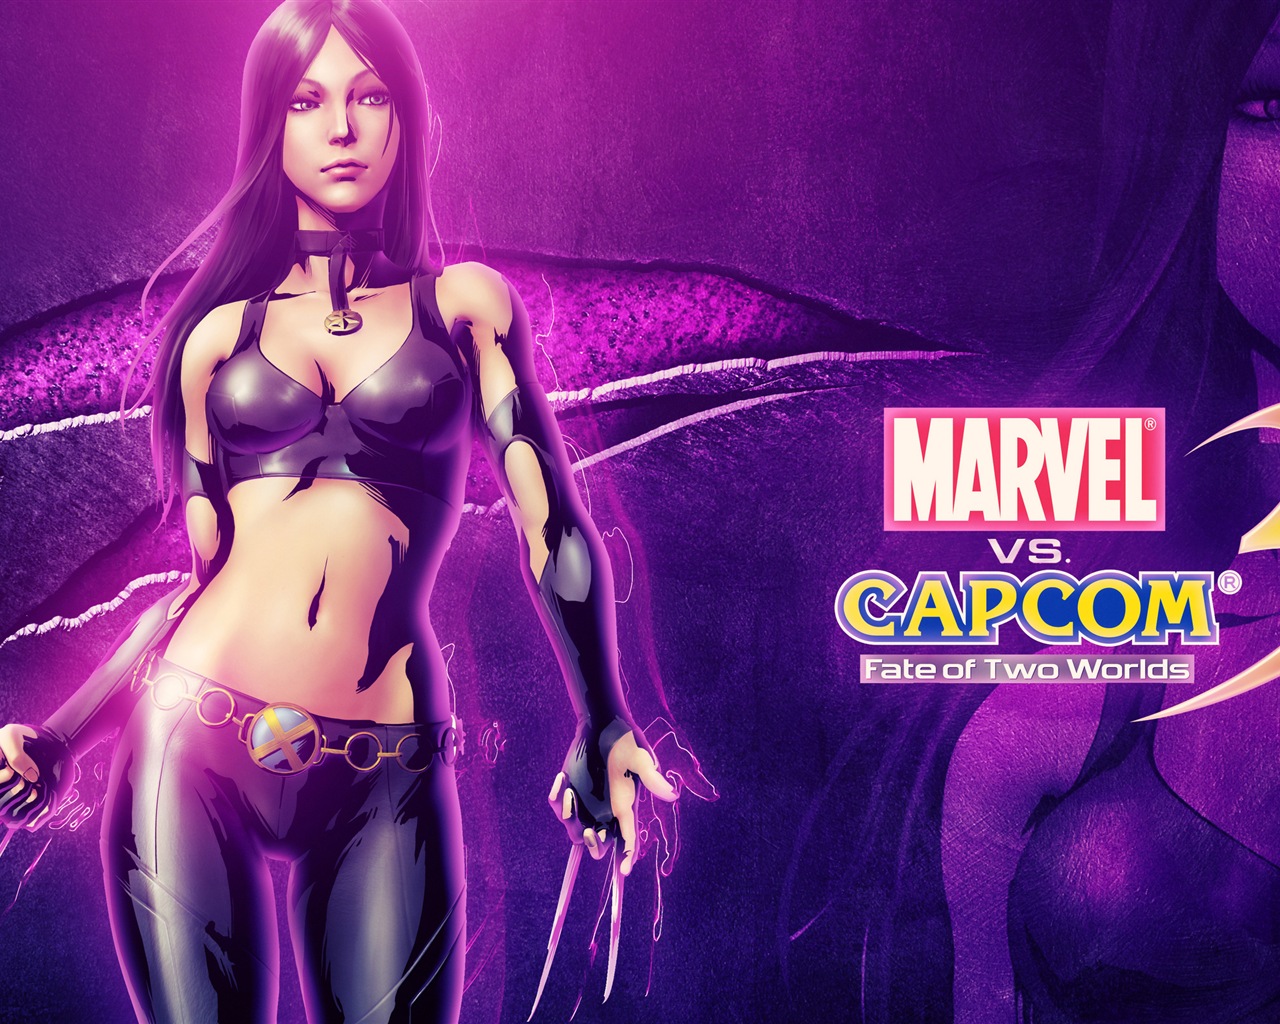 Marvel VS. Capcom 3: Fate of Two Worlds HD game wallpapers #10 - 1280x1024